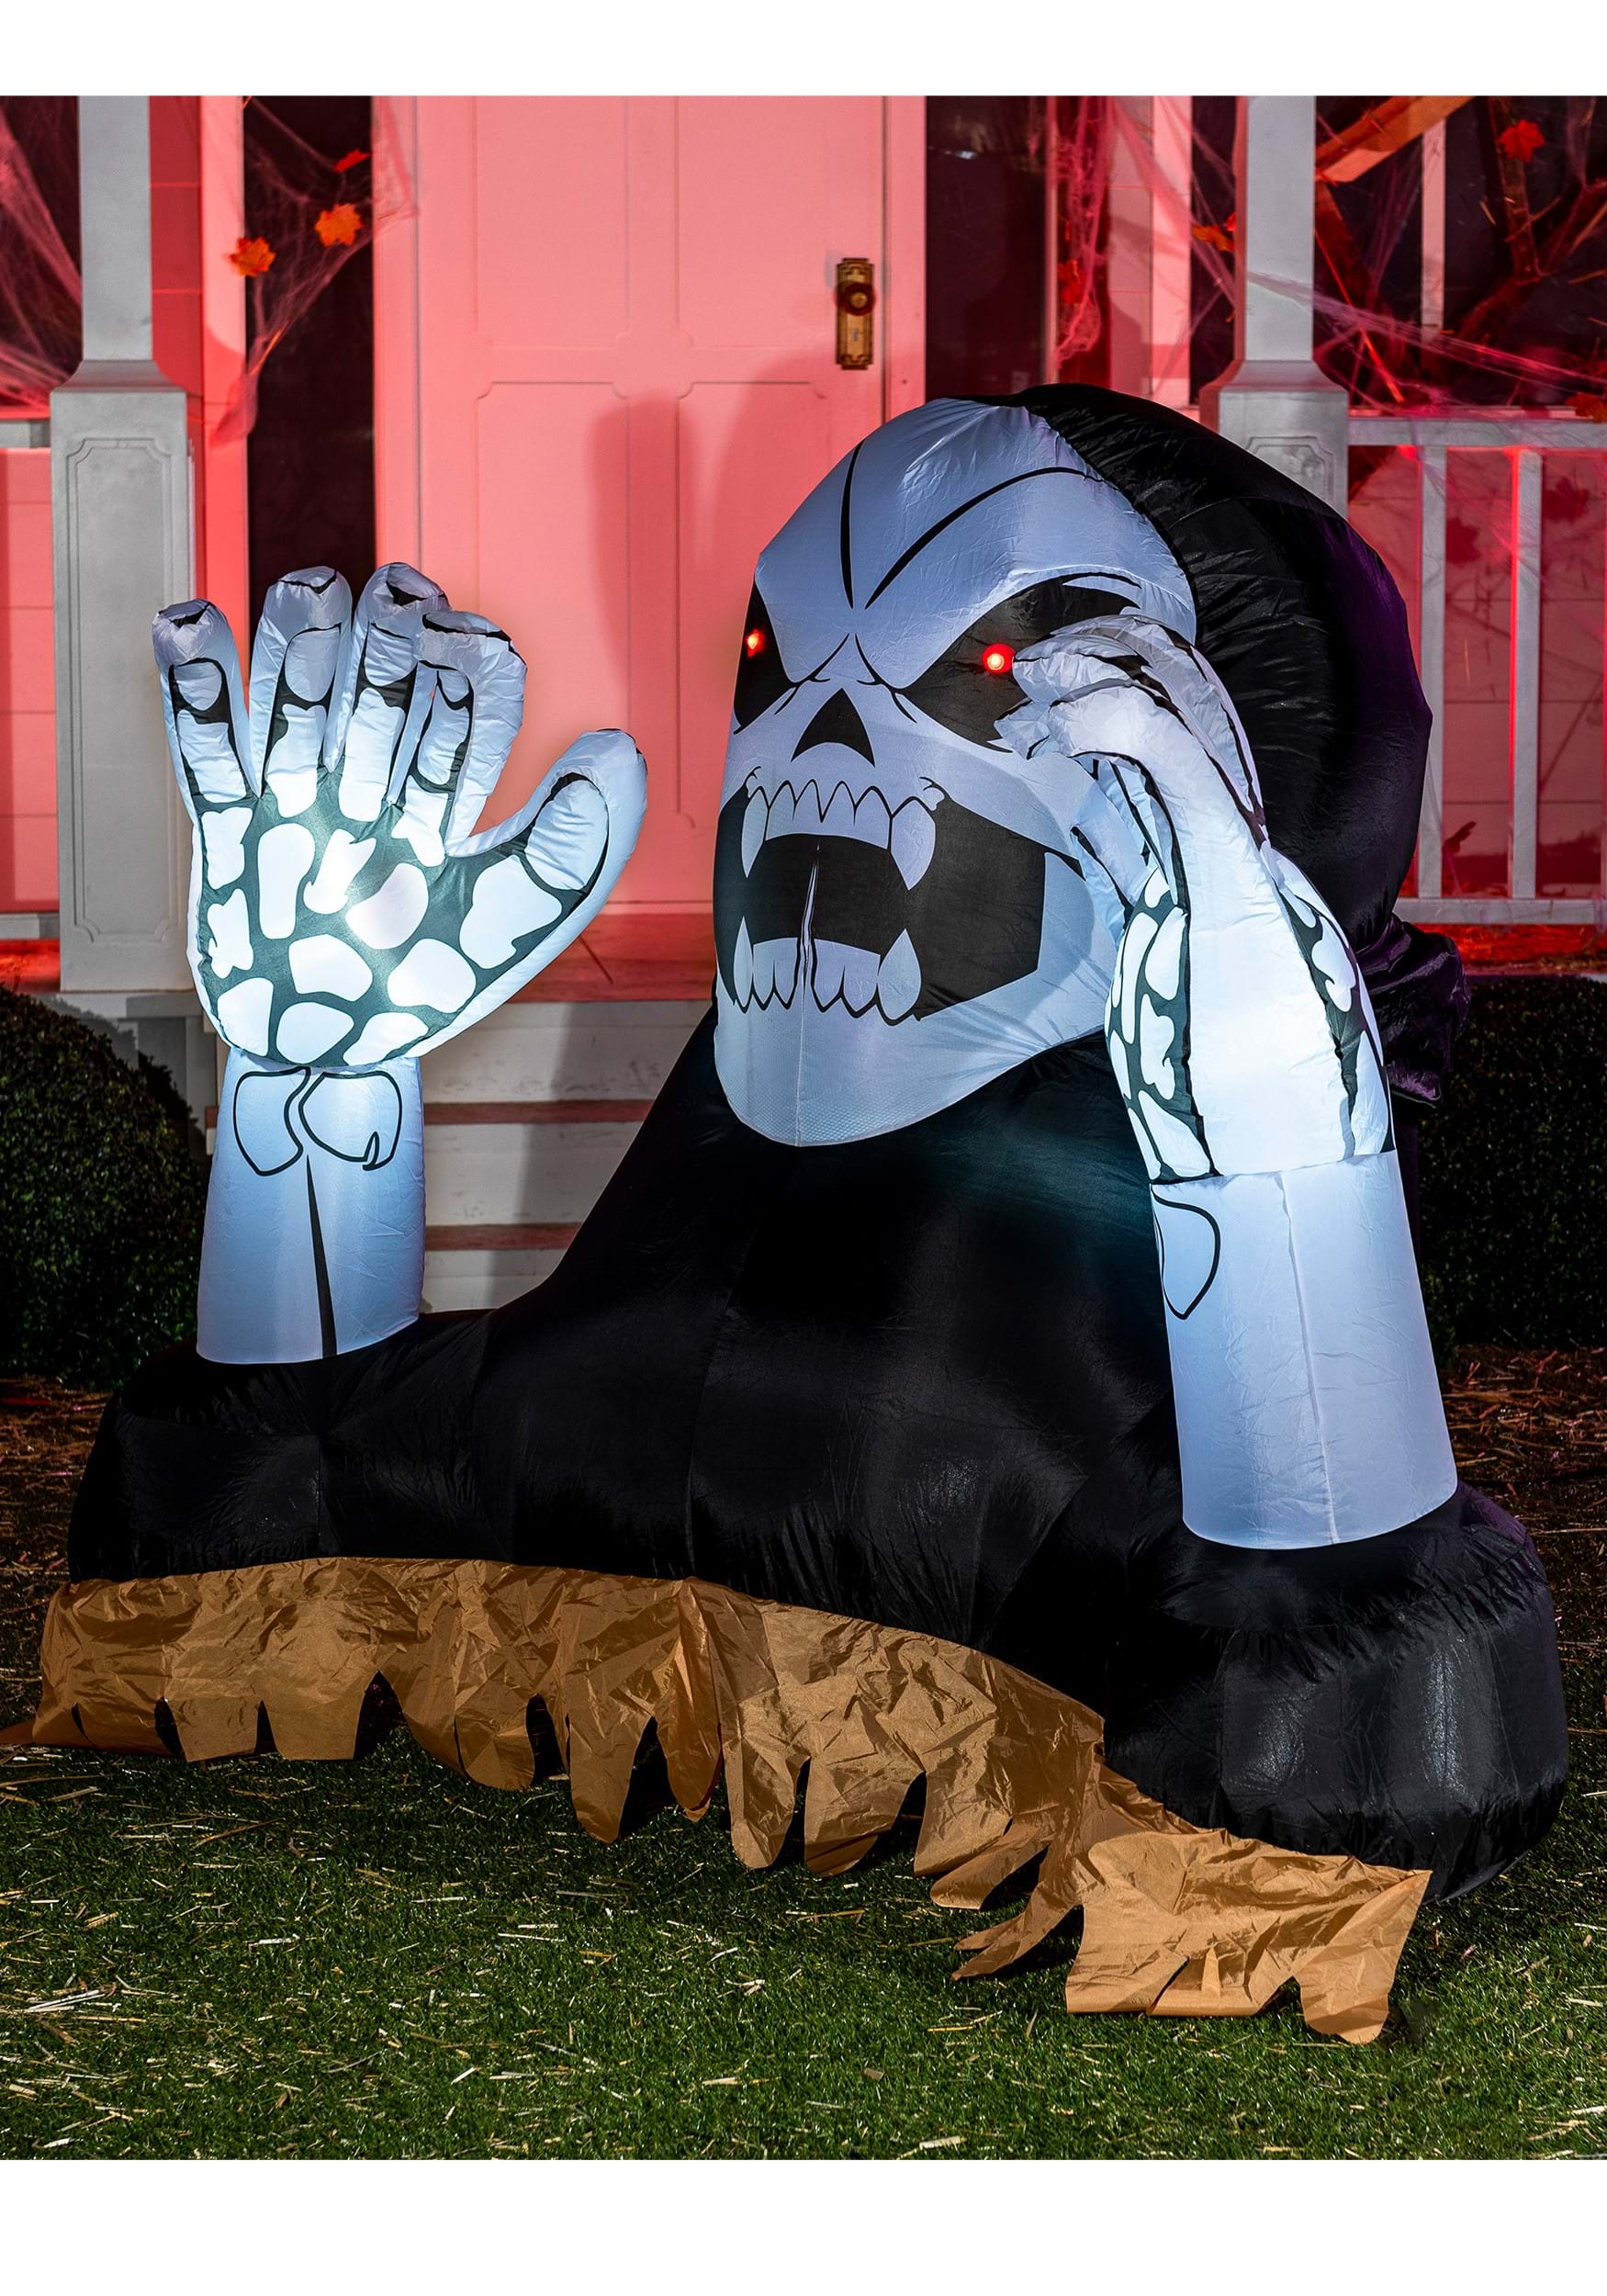 Inflatable 4FT Tall Rawring Reaper Decoration